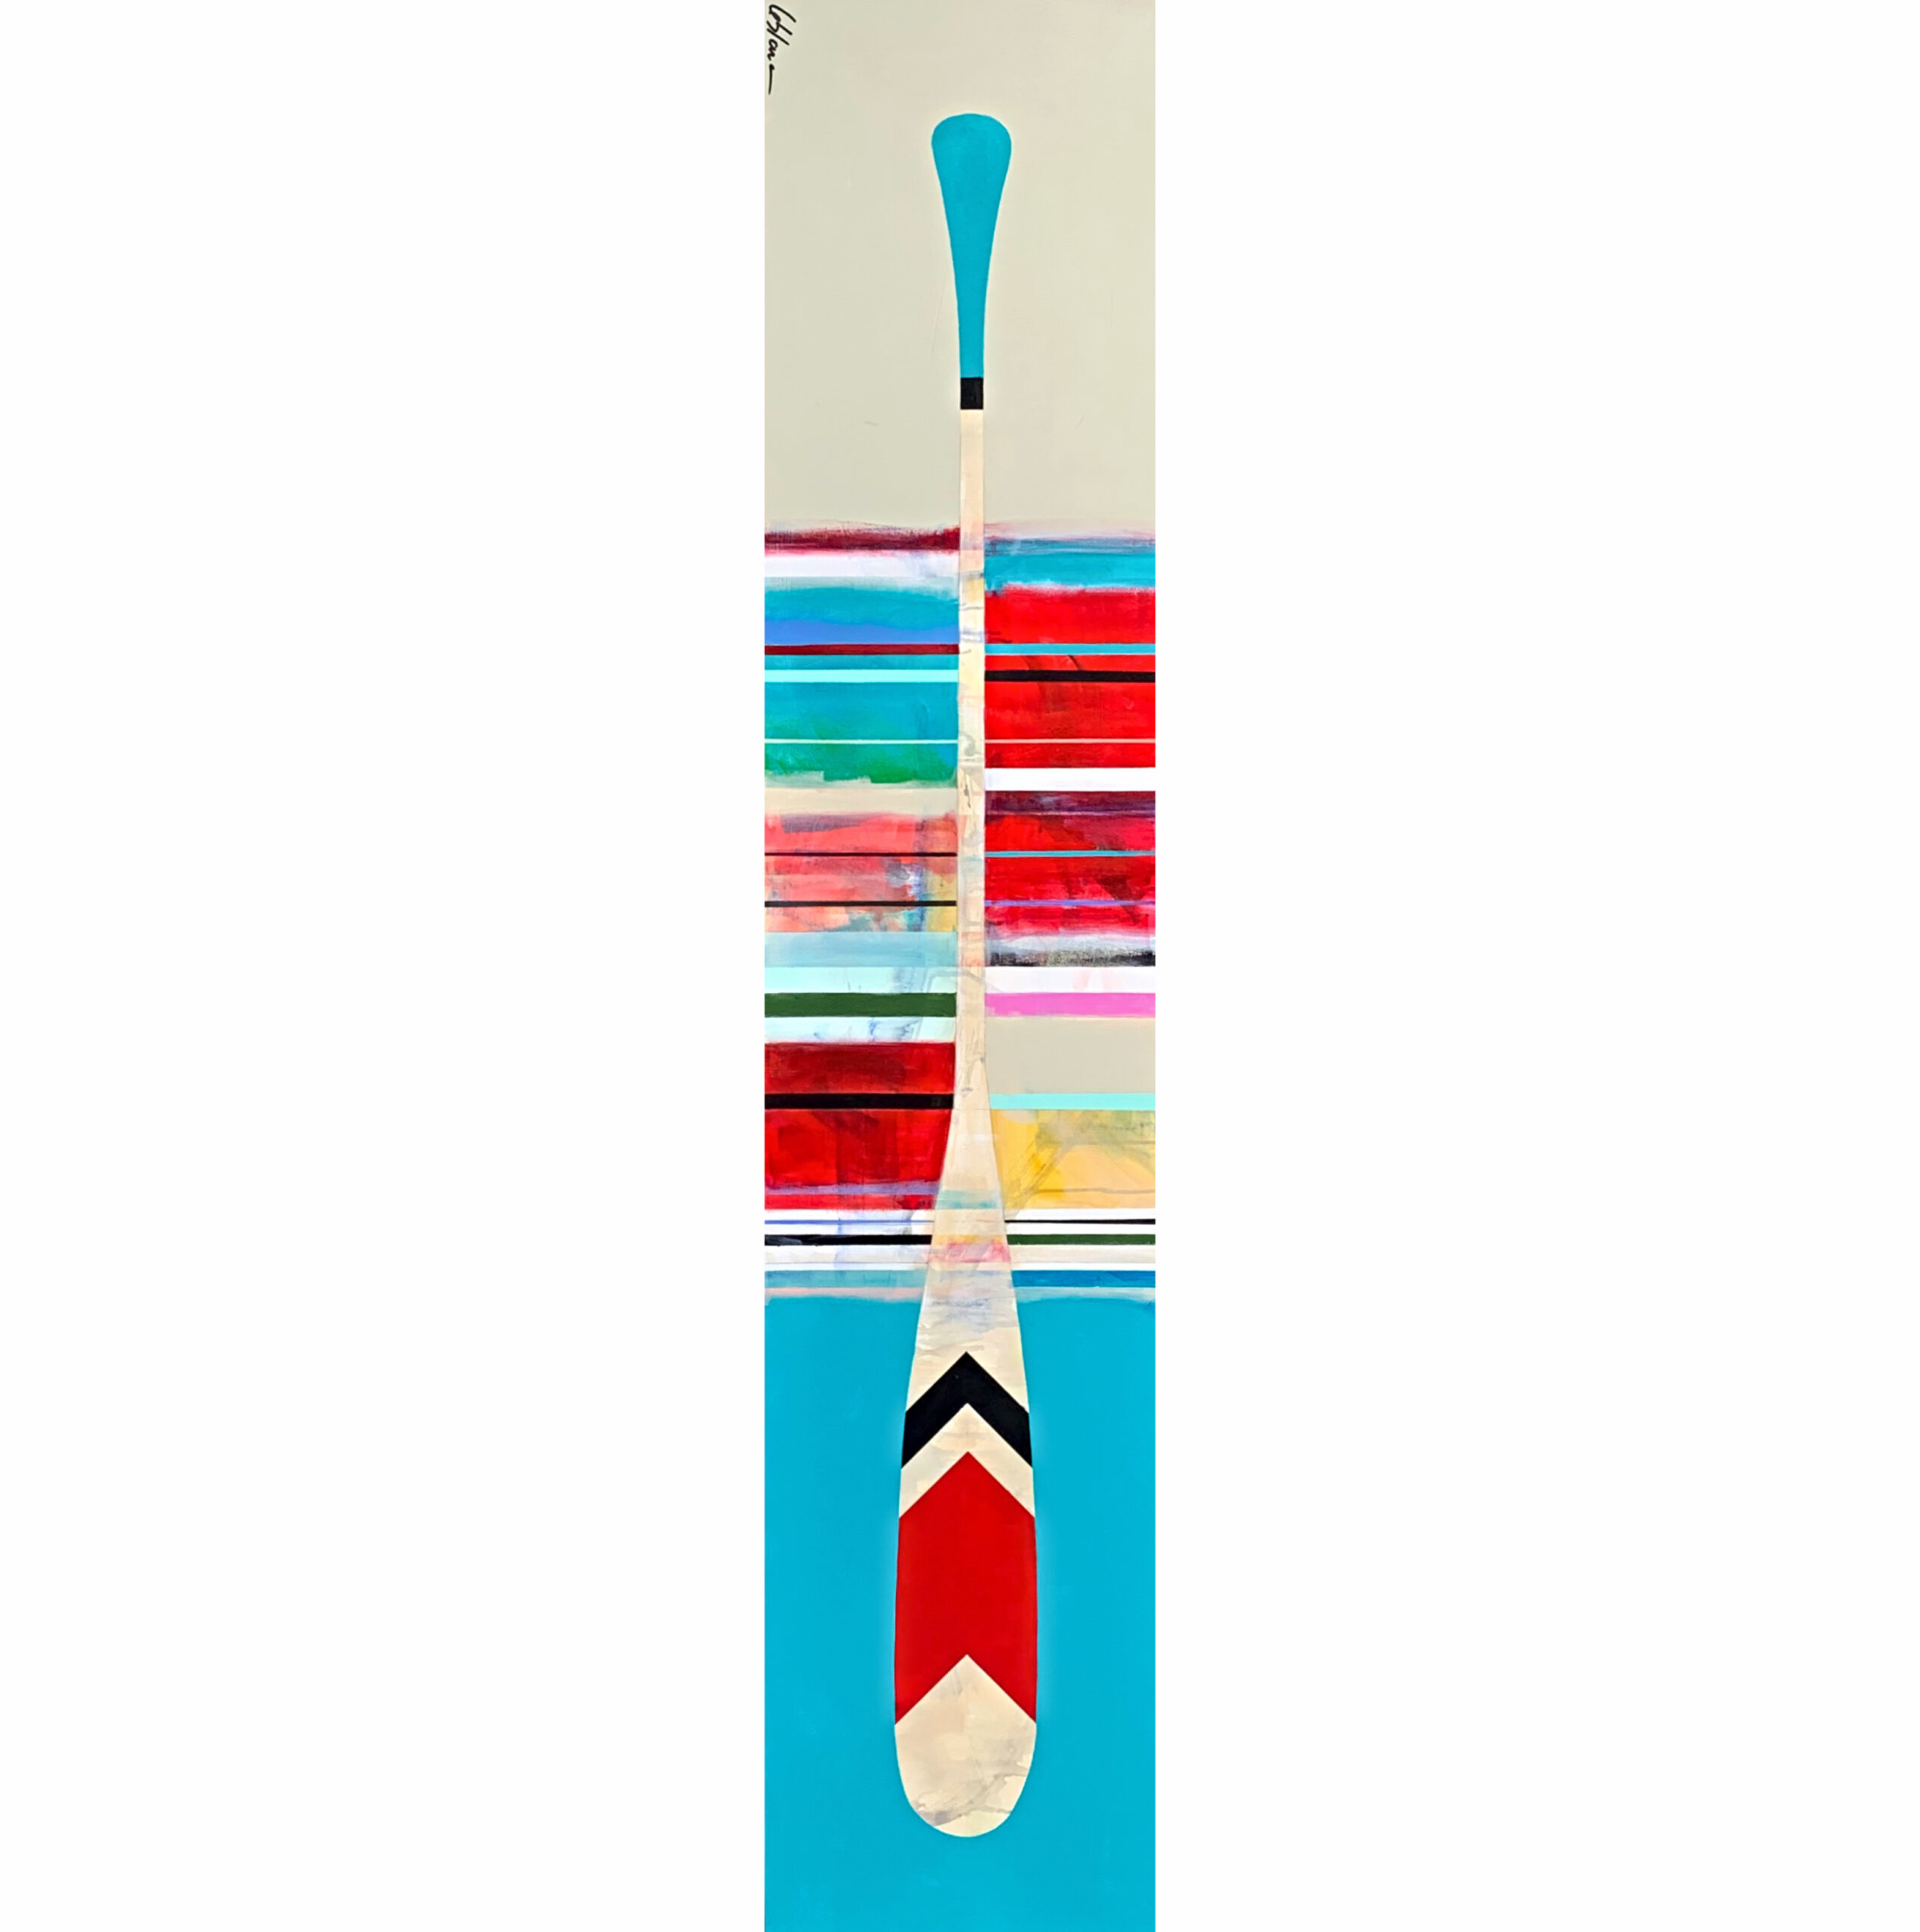 Courant ascendant, mixed media paddle painting by Sylvain Leblanc | Effusion Art Gallery, Invermere BC